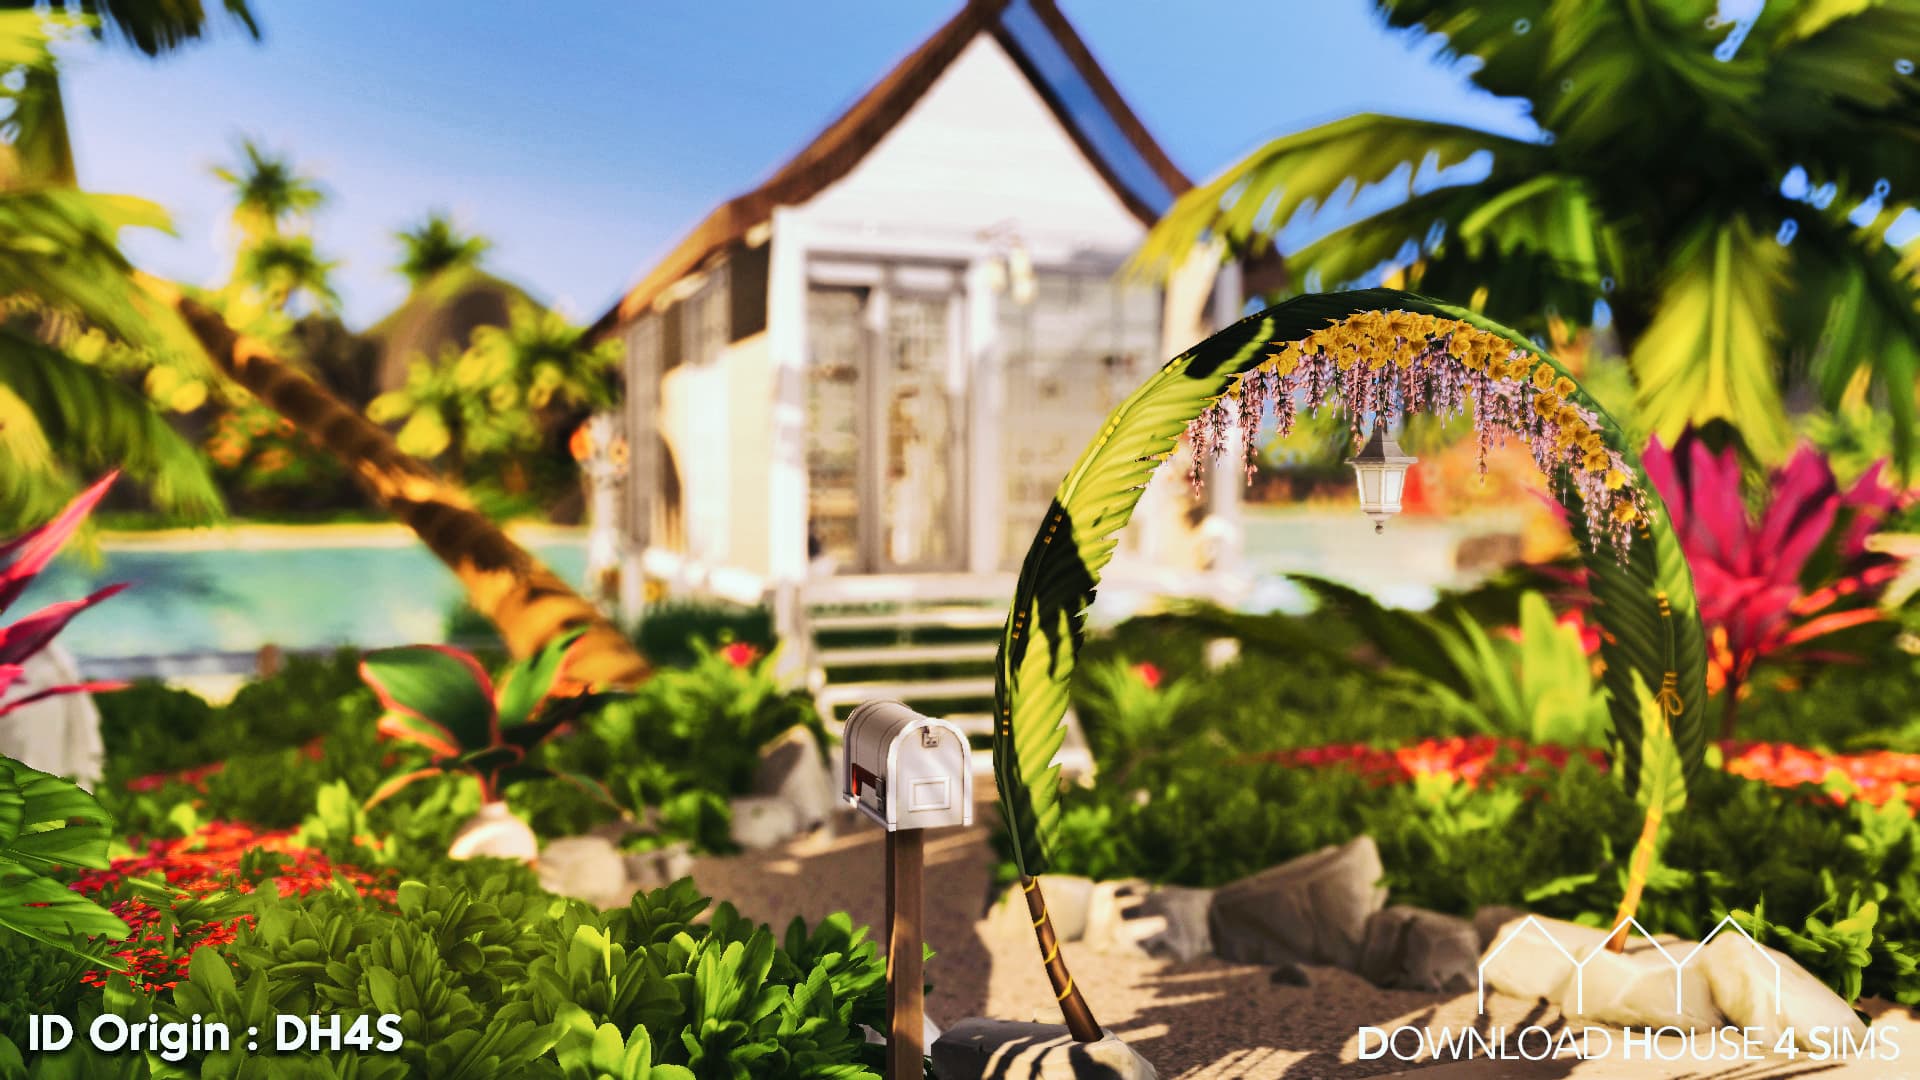 Download-House-4-sims-Tiny-beach-cabin-house-5